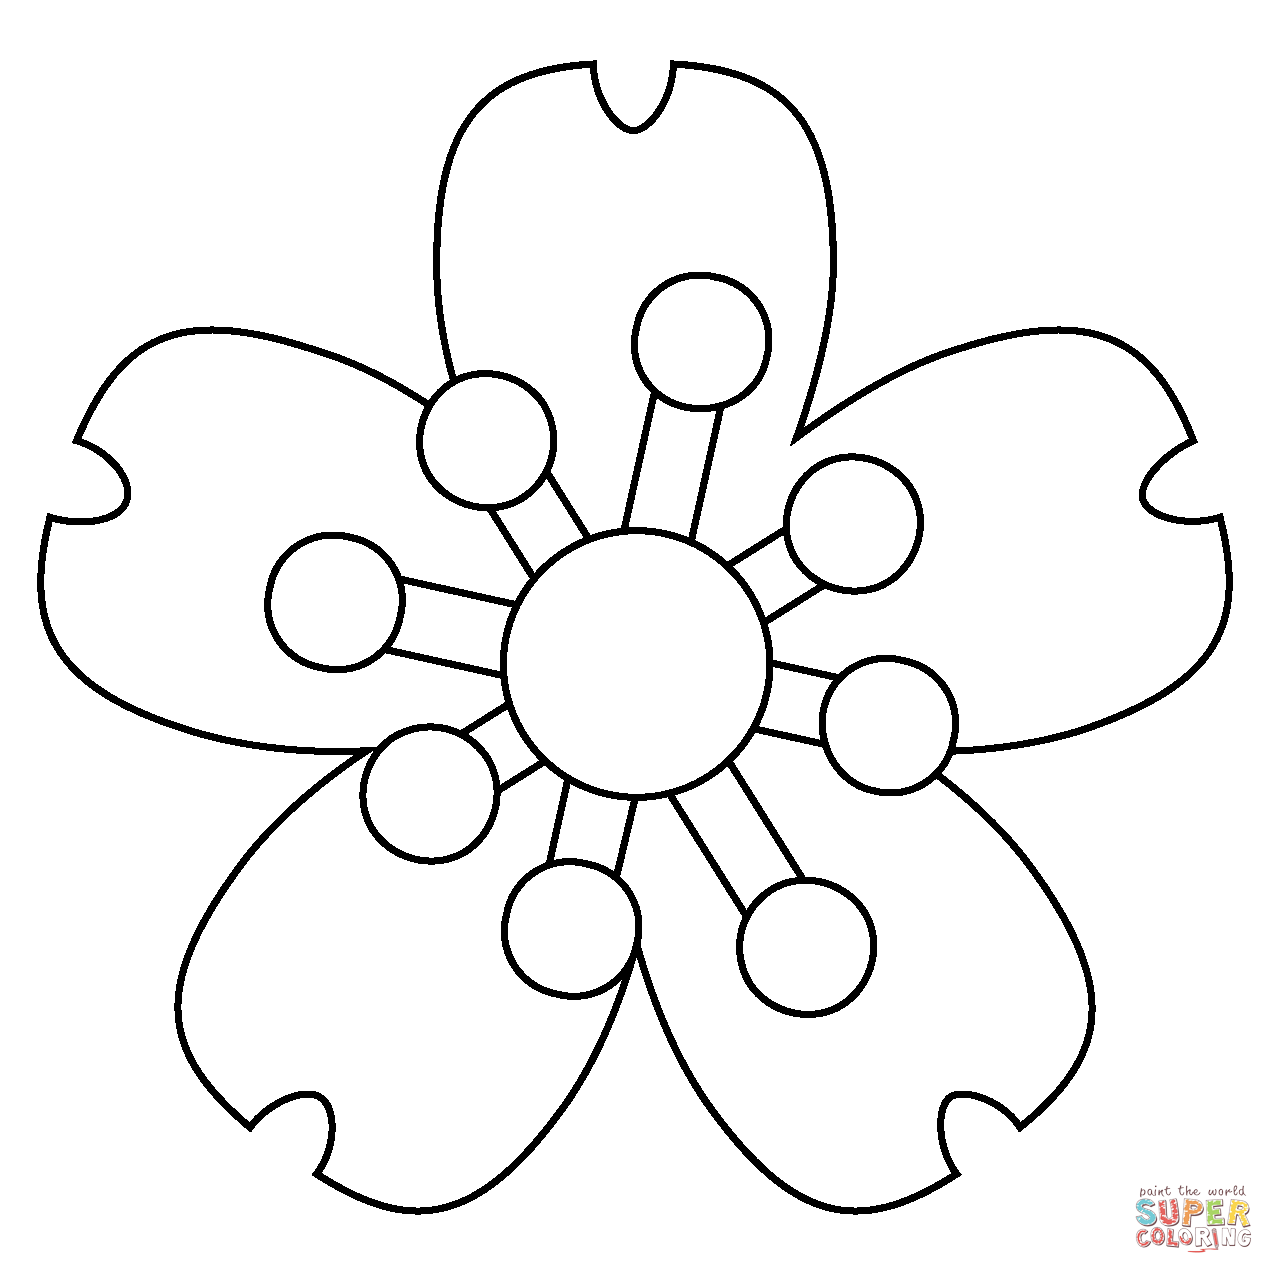 Cherry blossom emoji coloring page free printable coloring pages